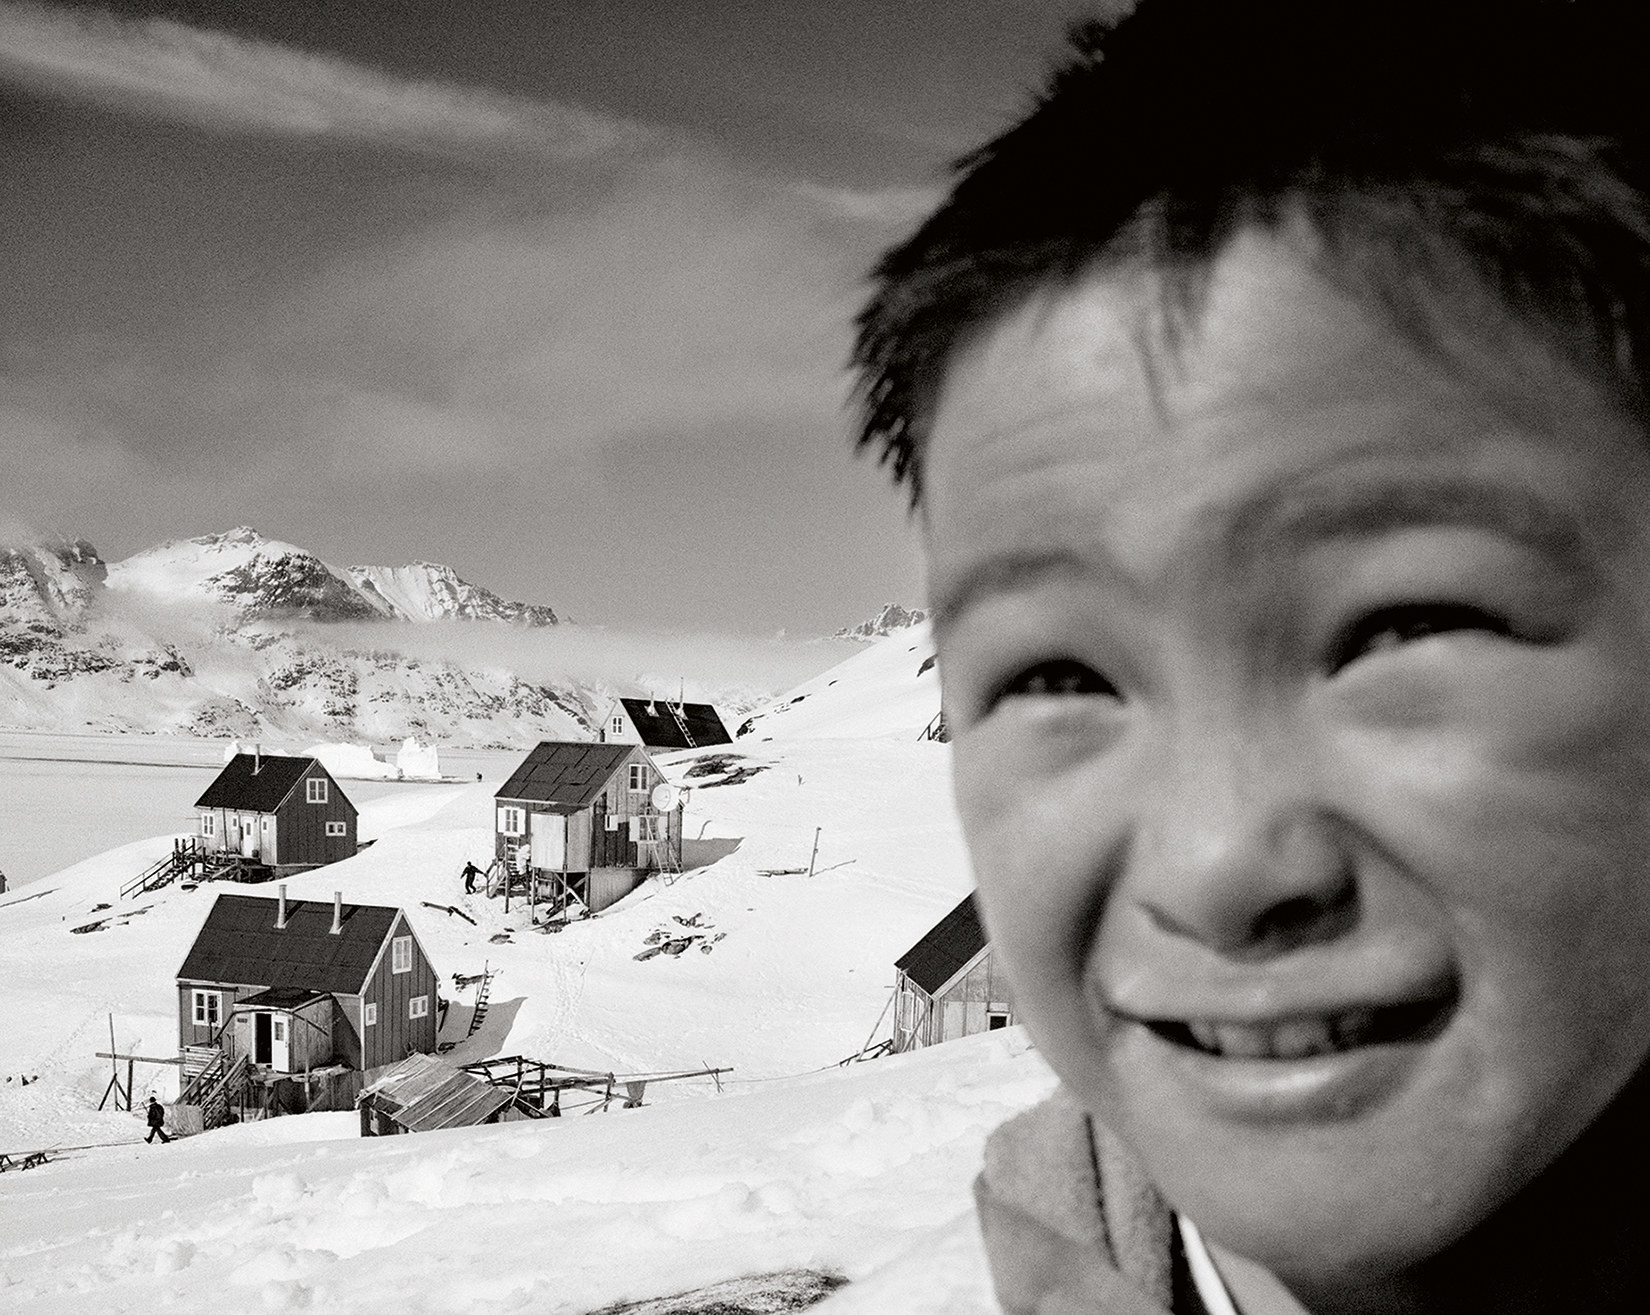 A child smiles into the camera with several small houses amid snow in the background